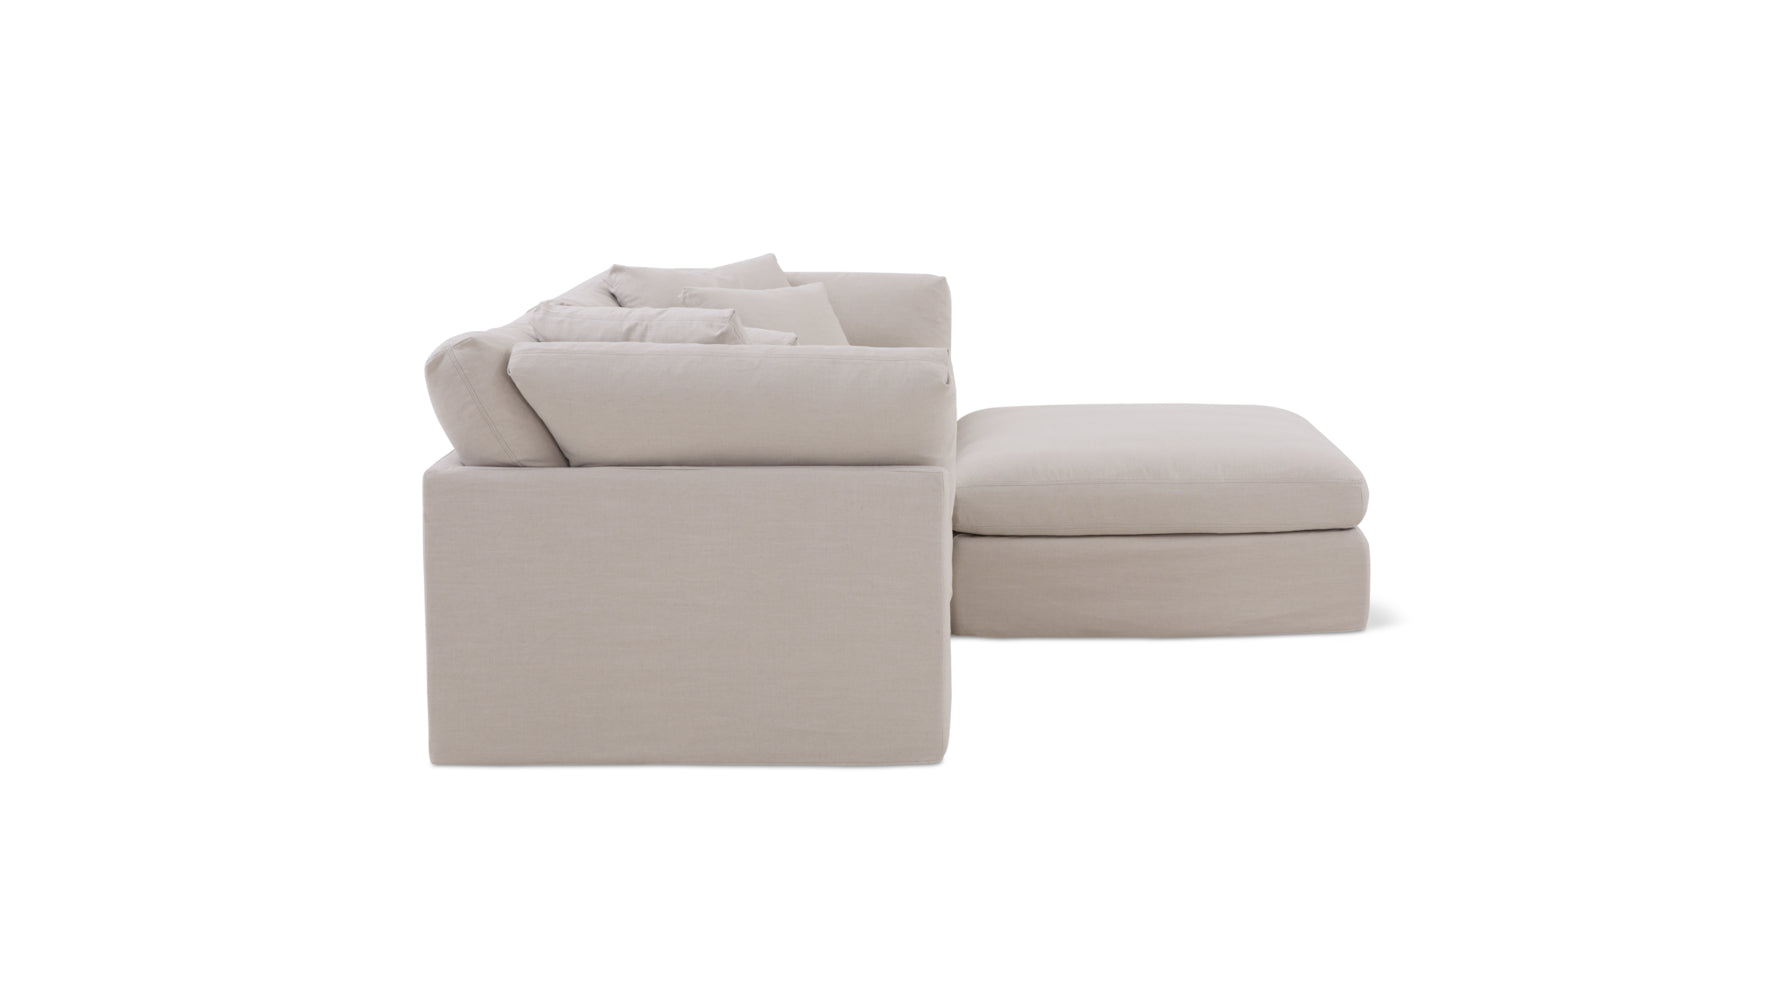 Get Together™ 3-Piece Modular Sectional, Large, Clay - Image 4